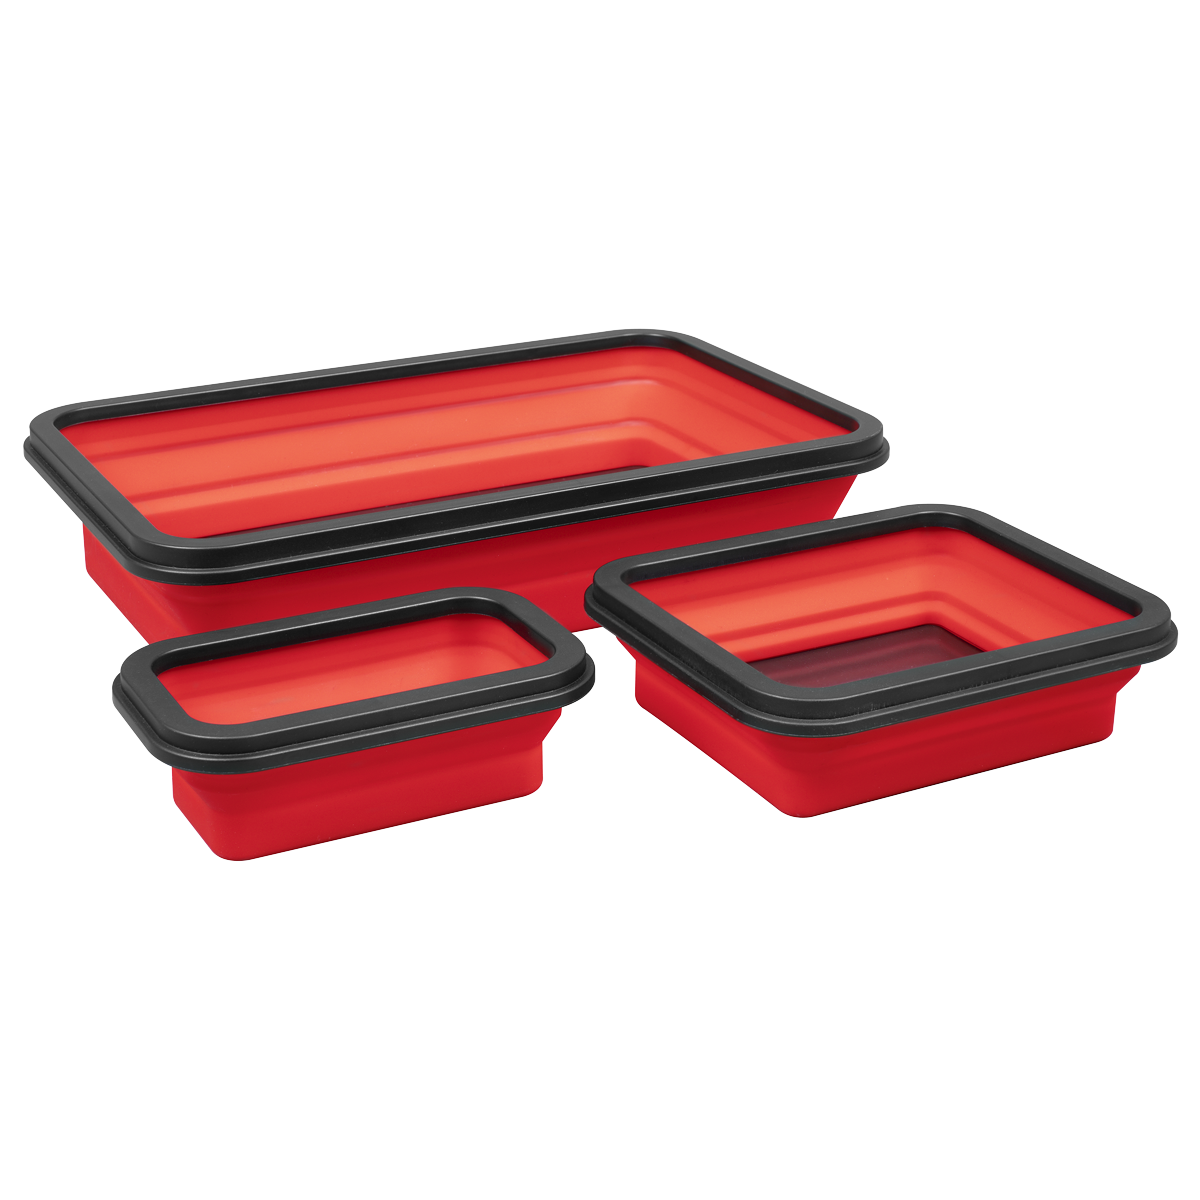 Sealey Collapsible Magnetic Parts Tray - Set of 3 APCMTS